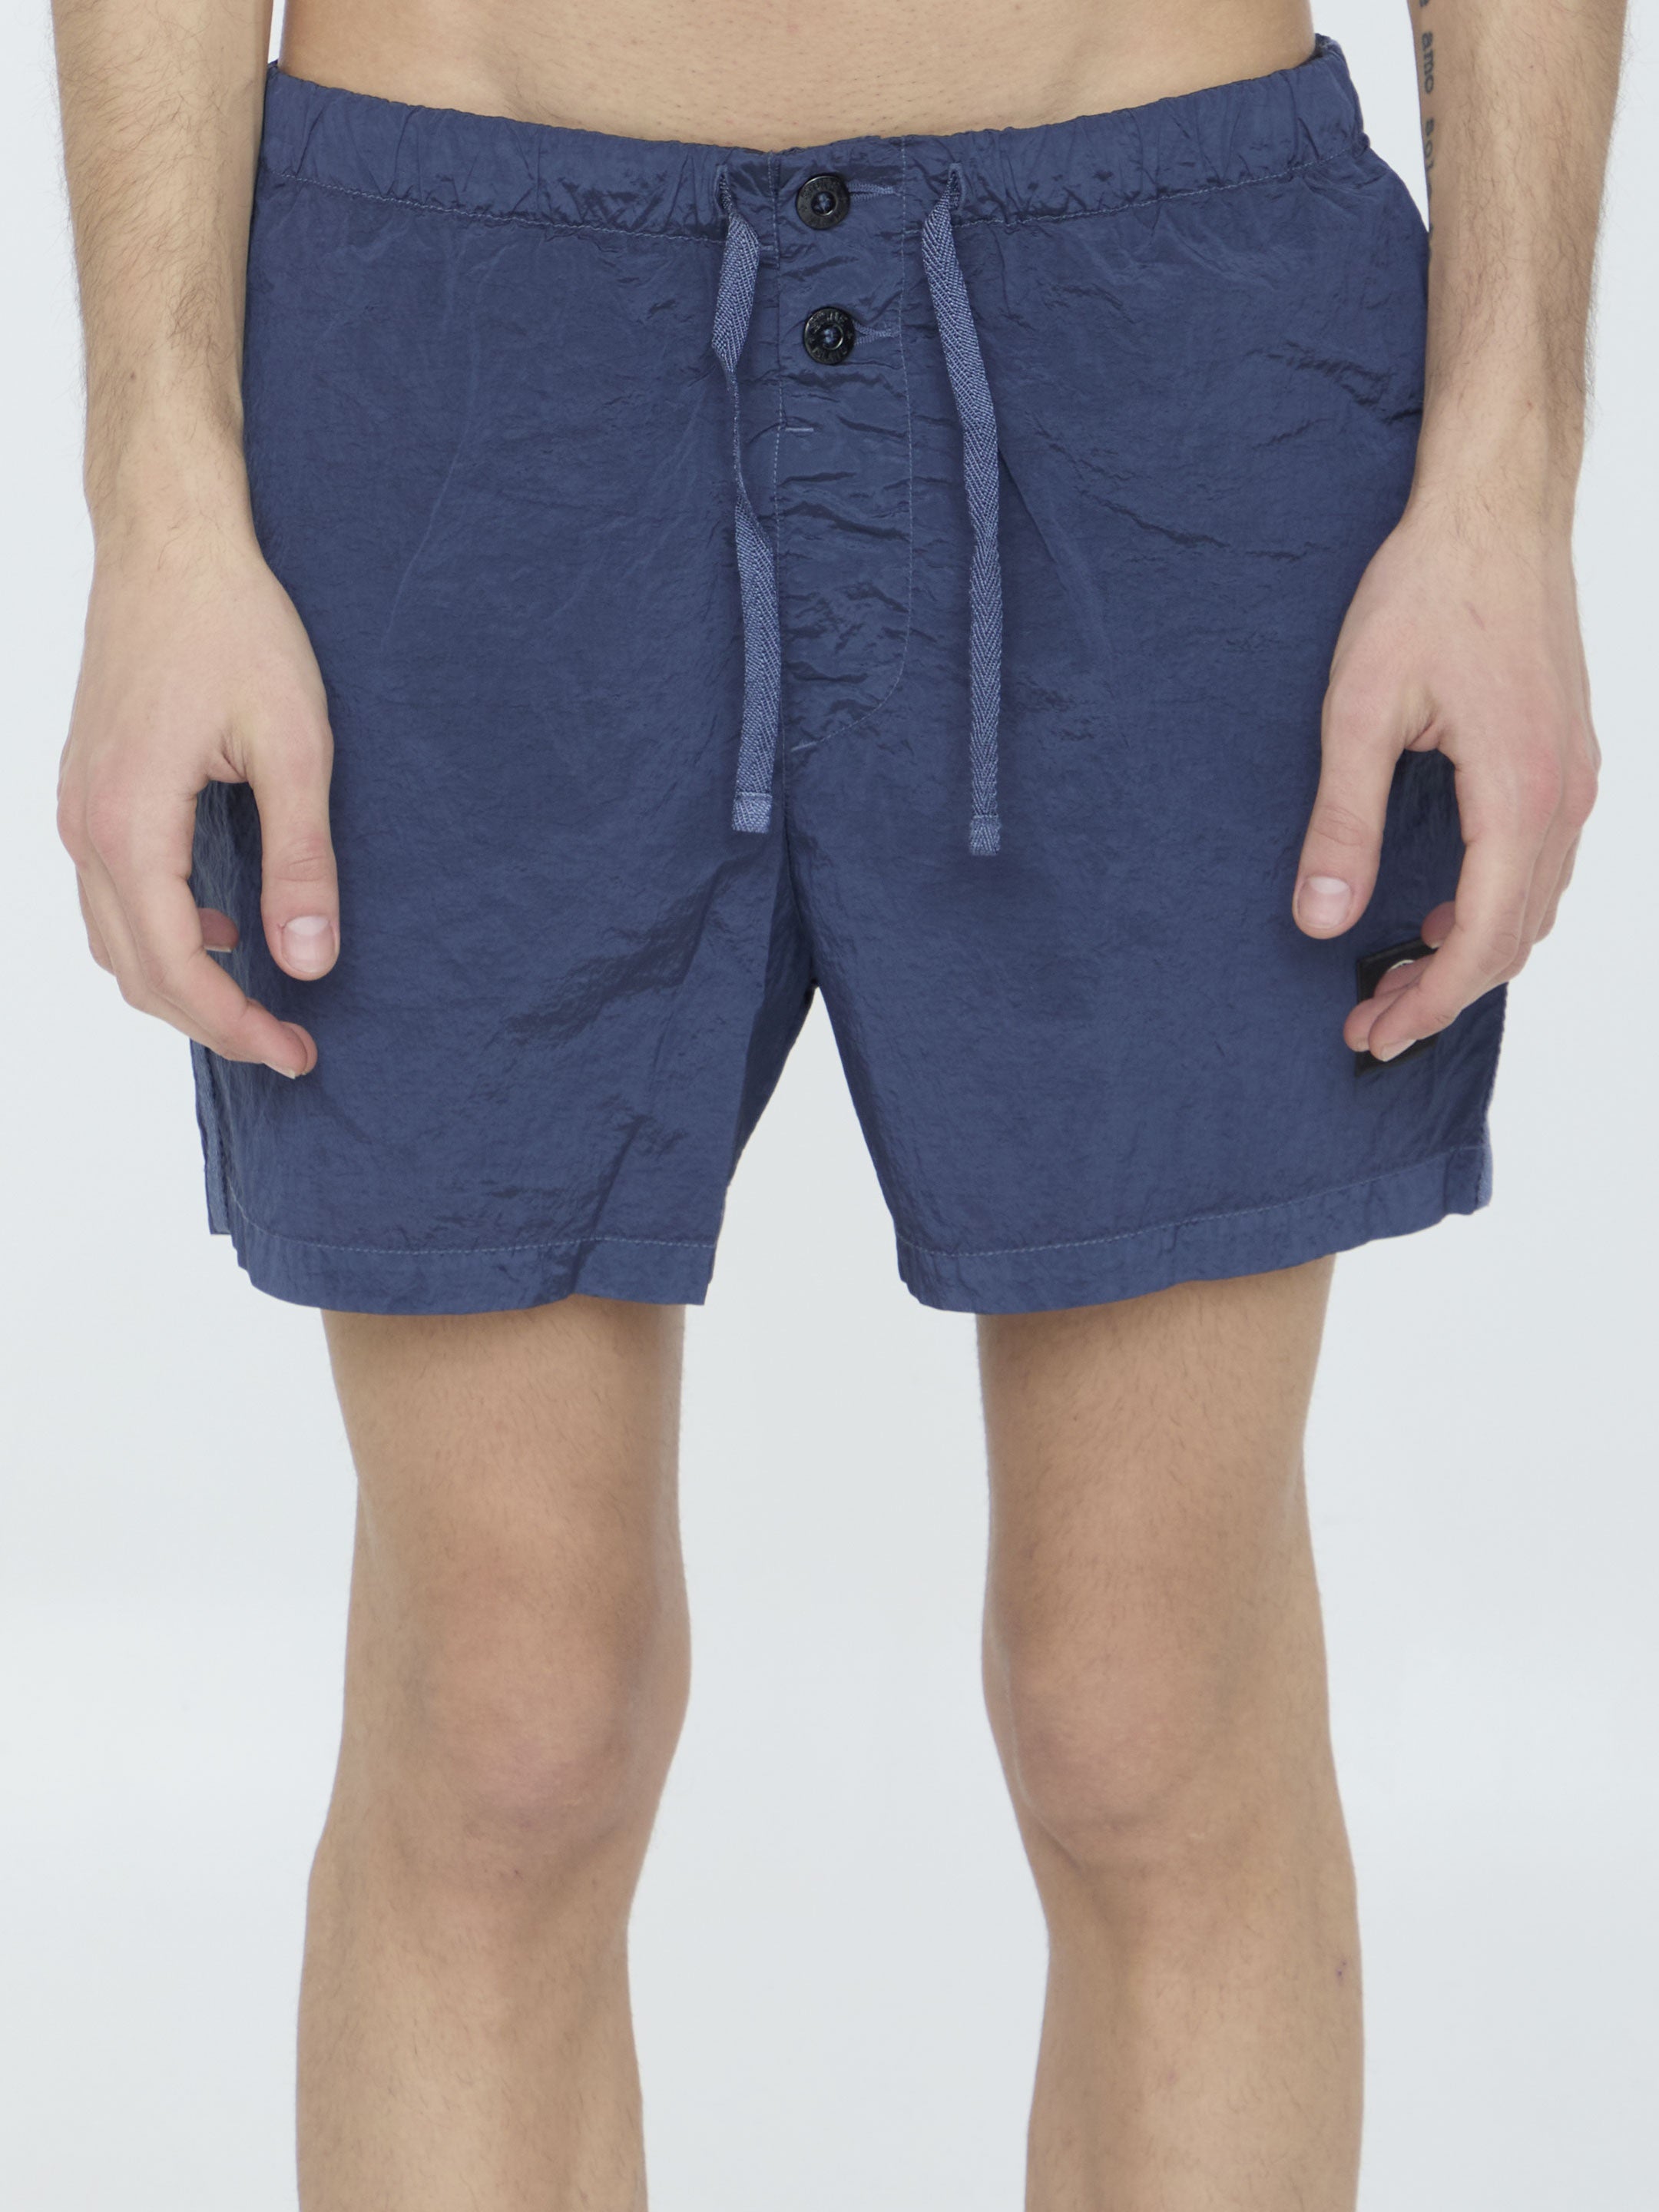 STONE-ISLAND-OUTLET-SALE-Swim-shorts-with-logo-Badebekleidung-L-LIGHT-BLUE-ARCHIVE-COLLECTION.jpg